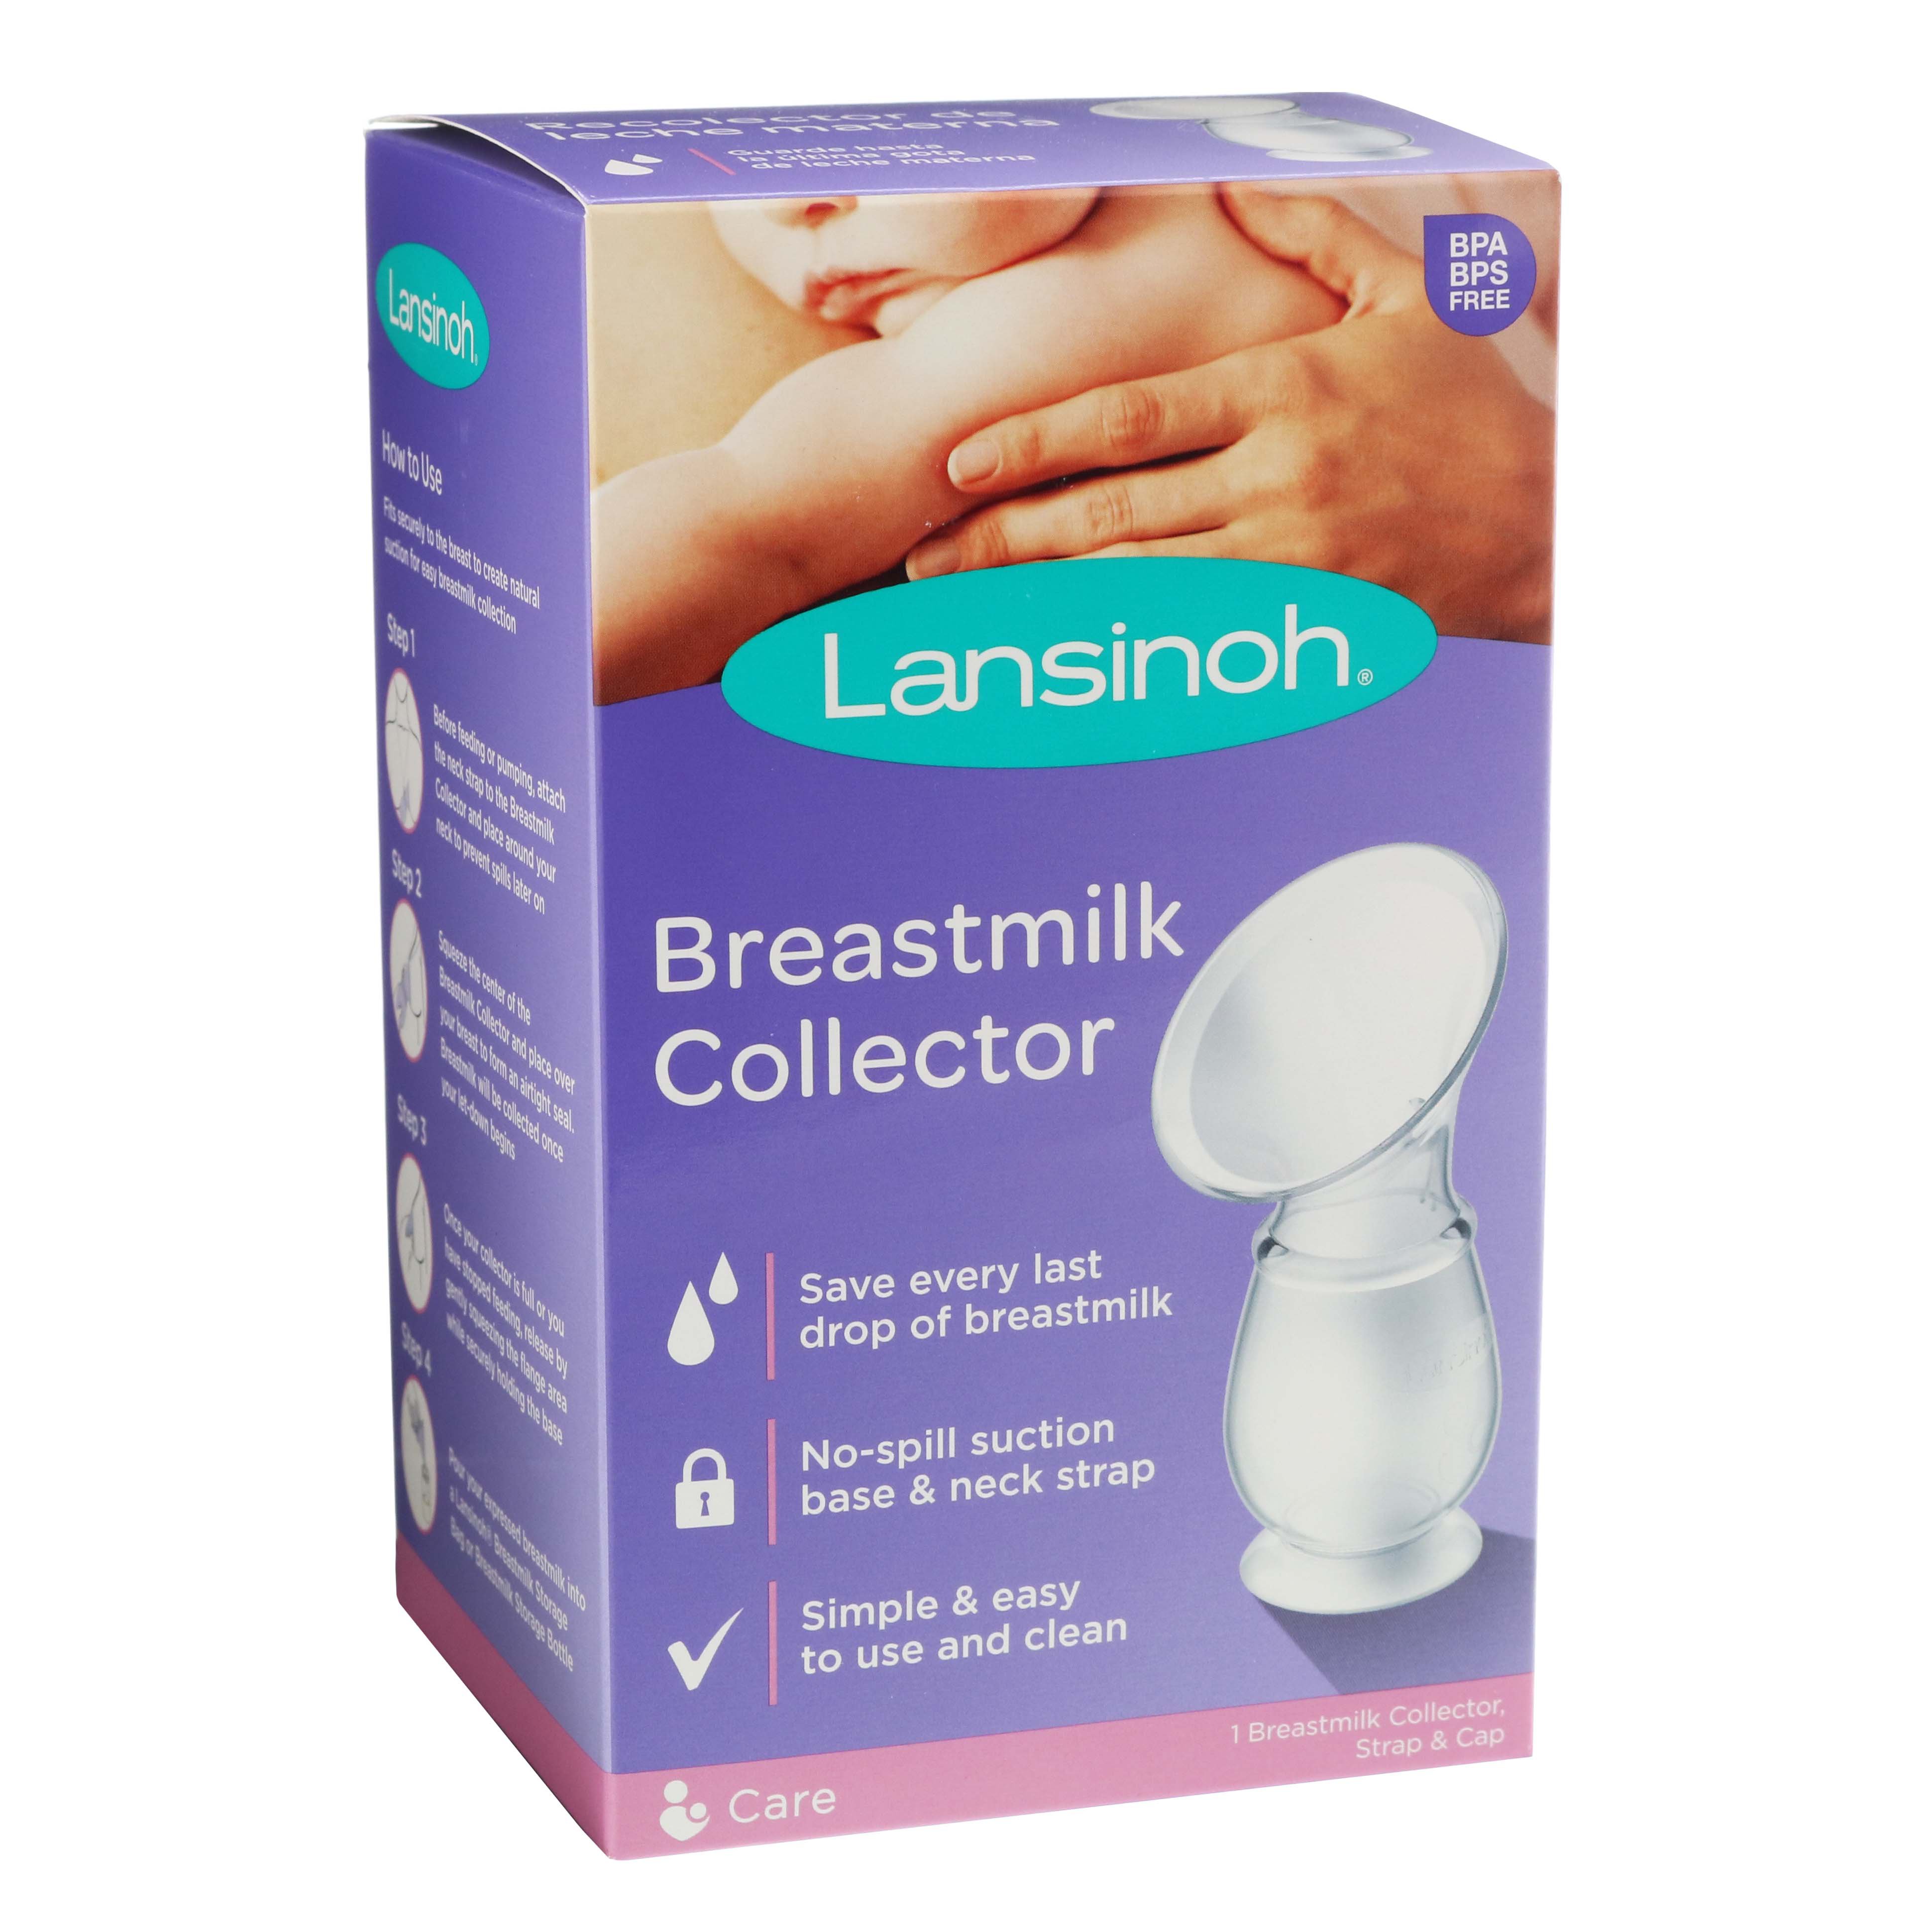 Lansinoh Breastmilk Collector - Shop Breast Feeding Accessories at